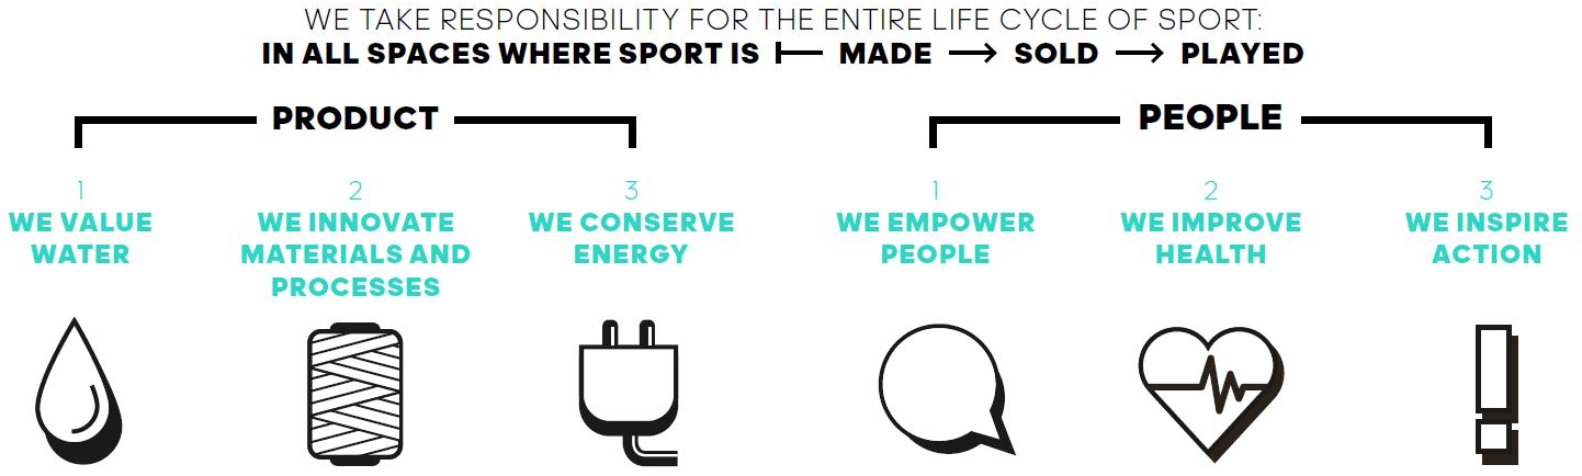 Adidas' Sustainability Efforts: 2020 and Beyond - TENNIS EXPRESS BLOG